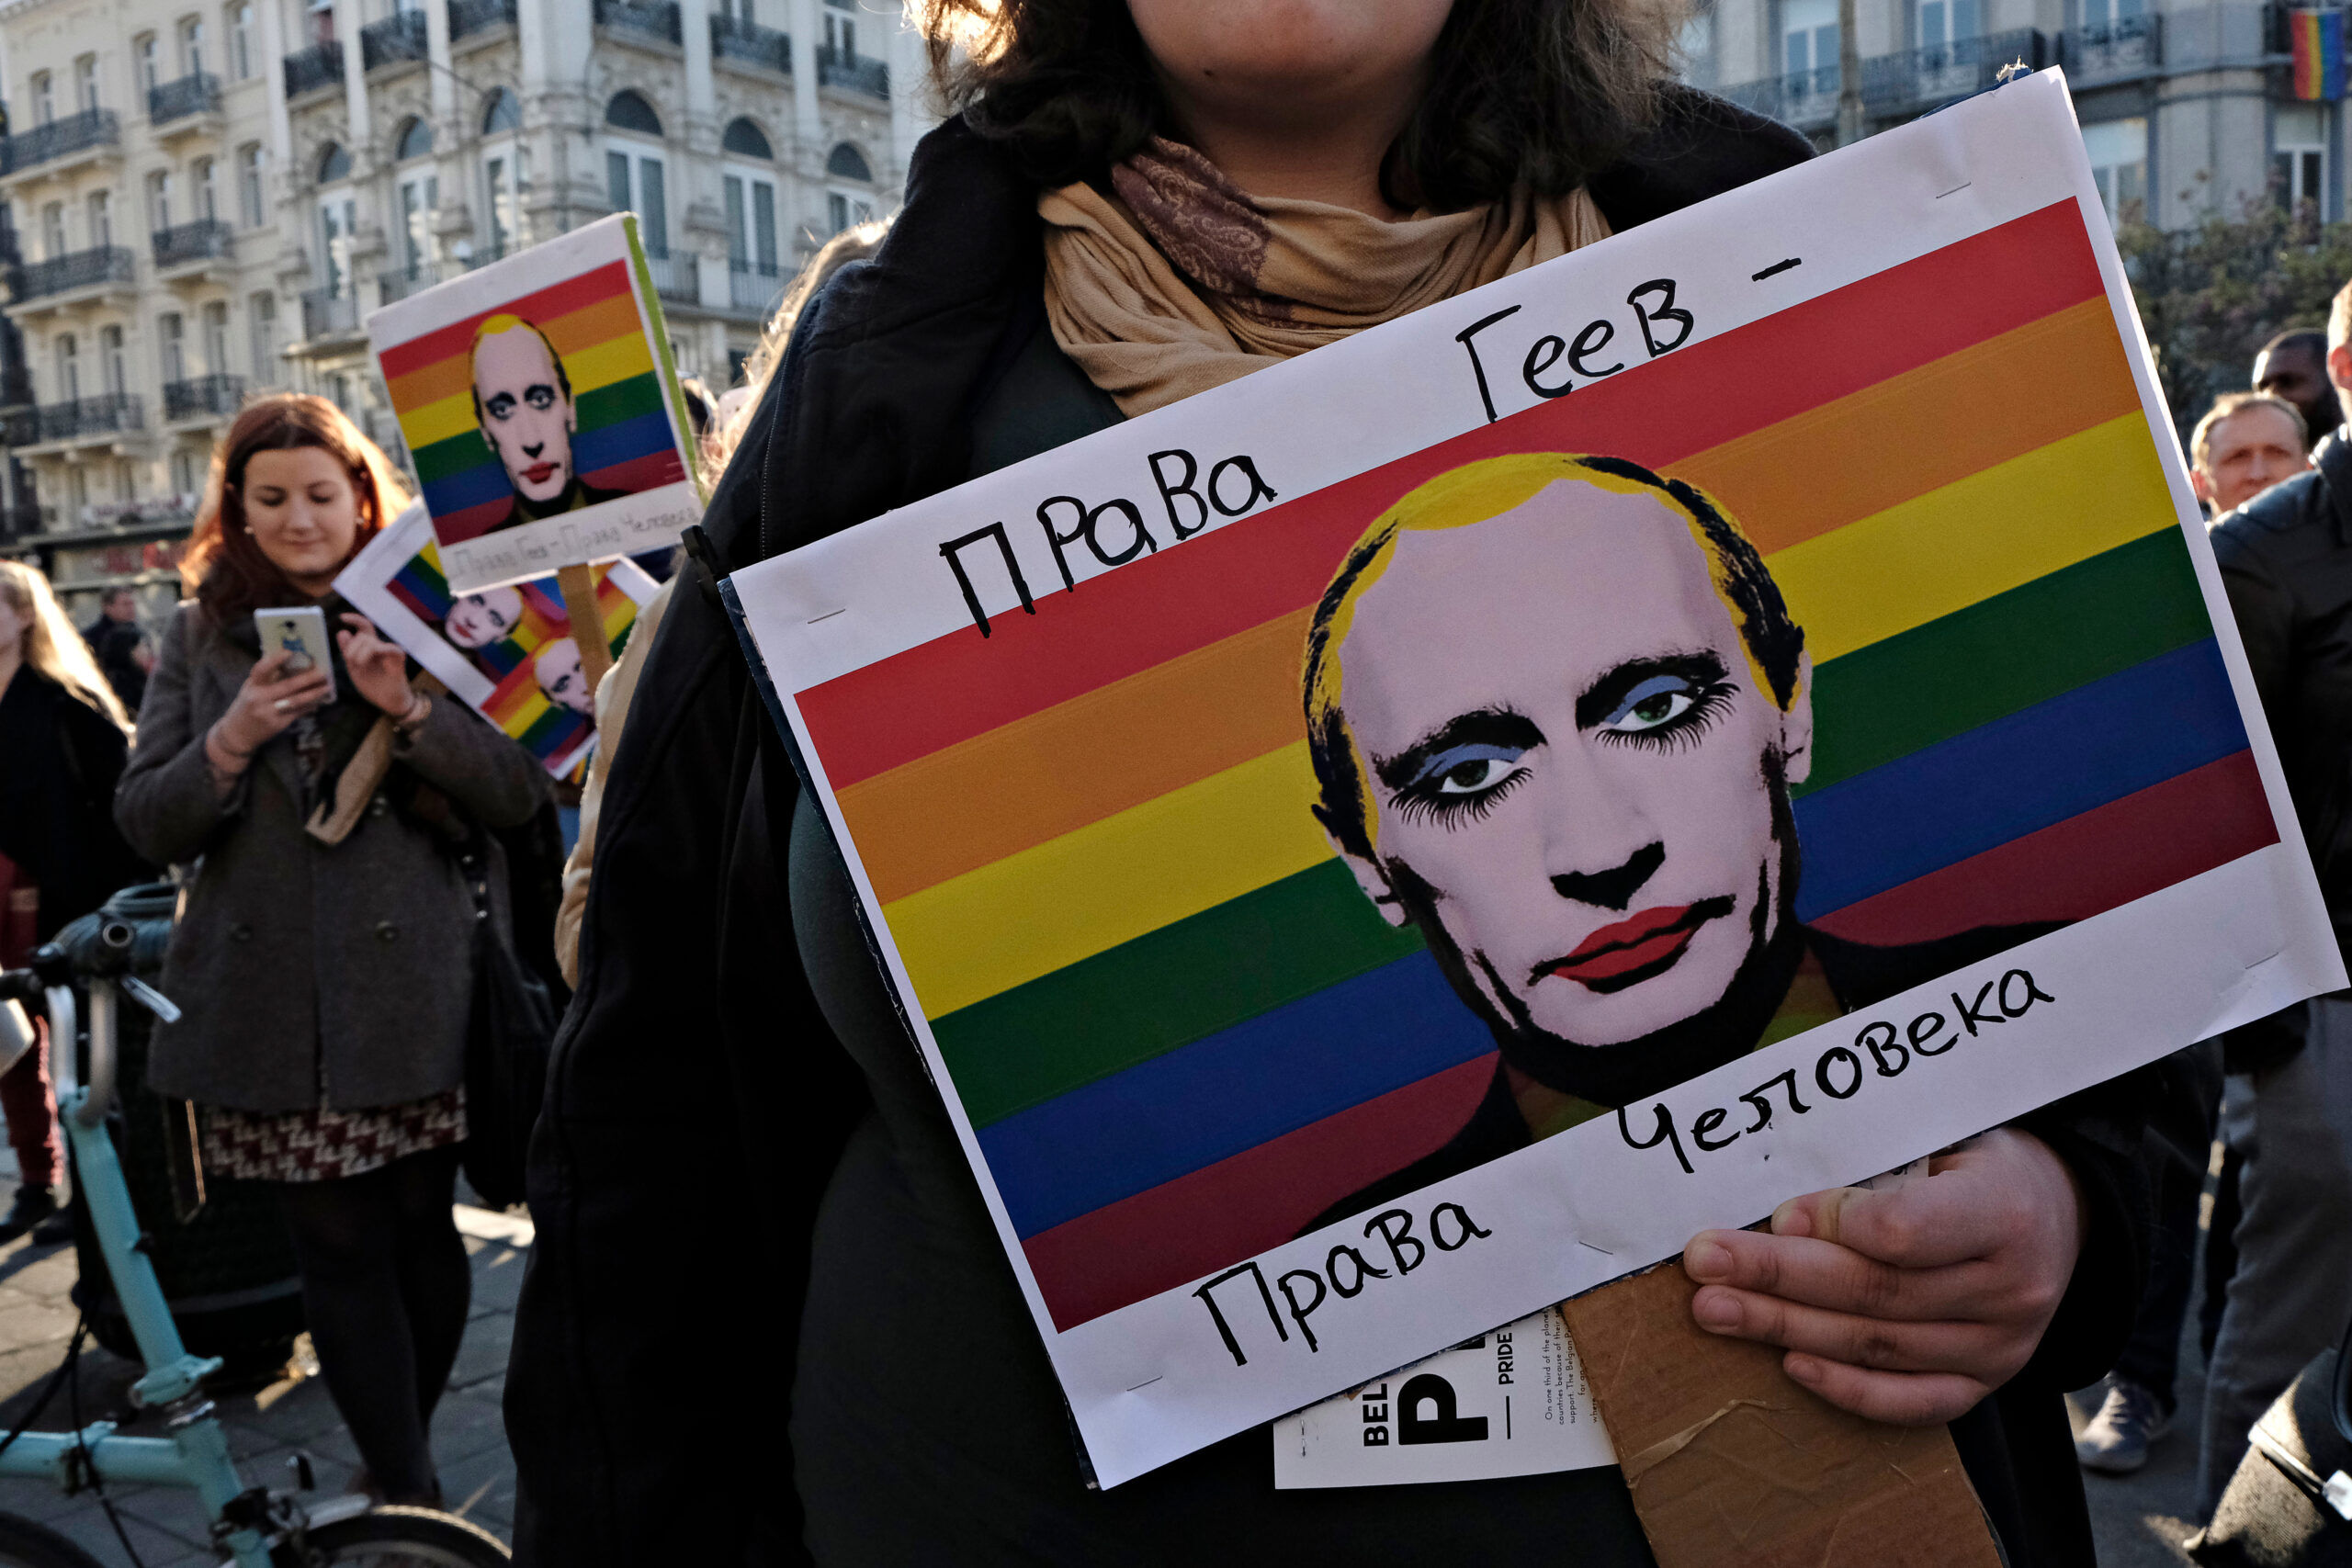 Brussels, Belgium March 20, 2017. A woman holds a placard with an image of Russian President Vladimir Putin during protest against the detention of gay men in concentration camps in Chechnya.